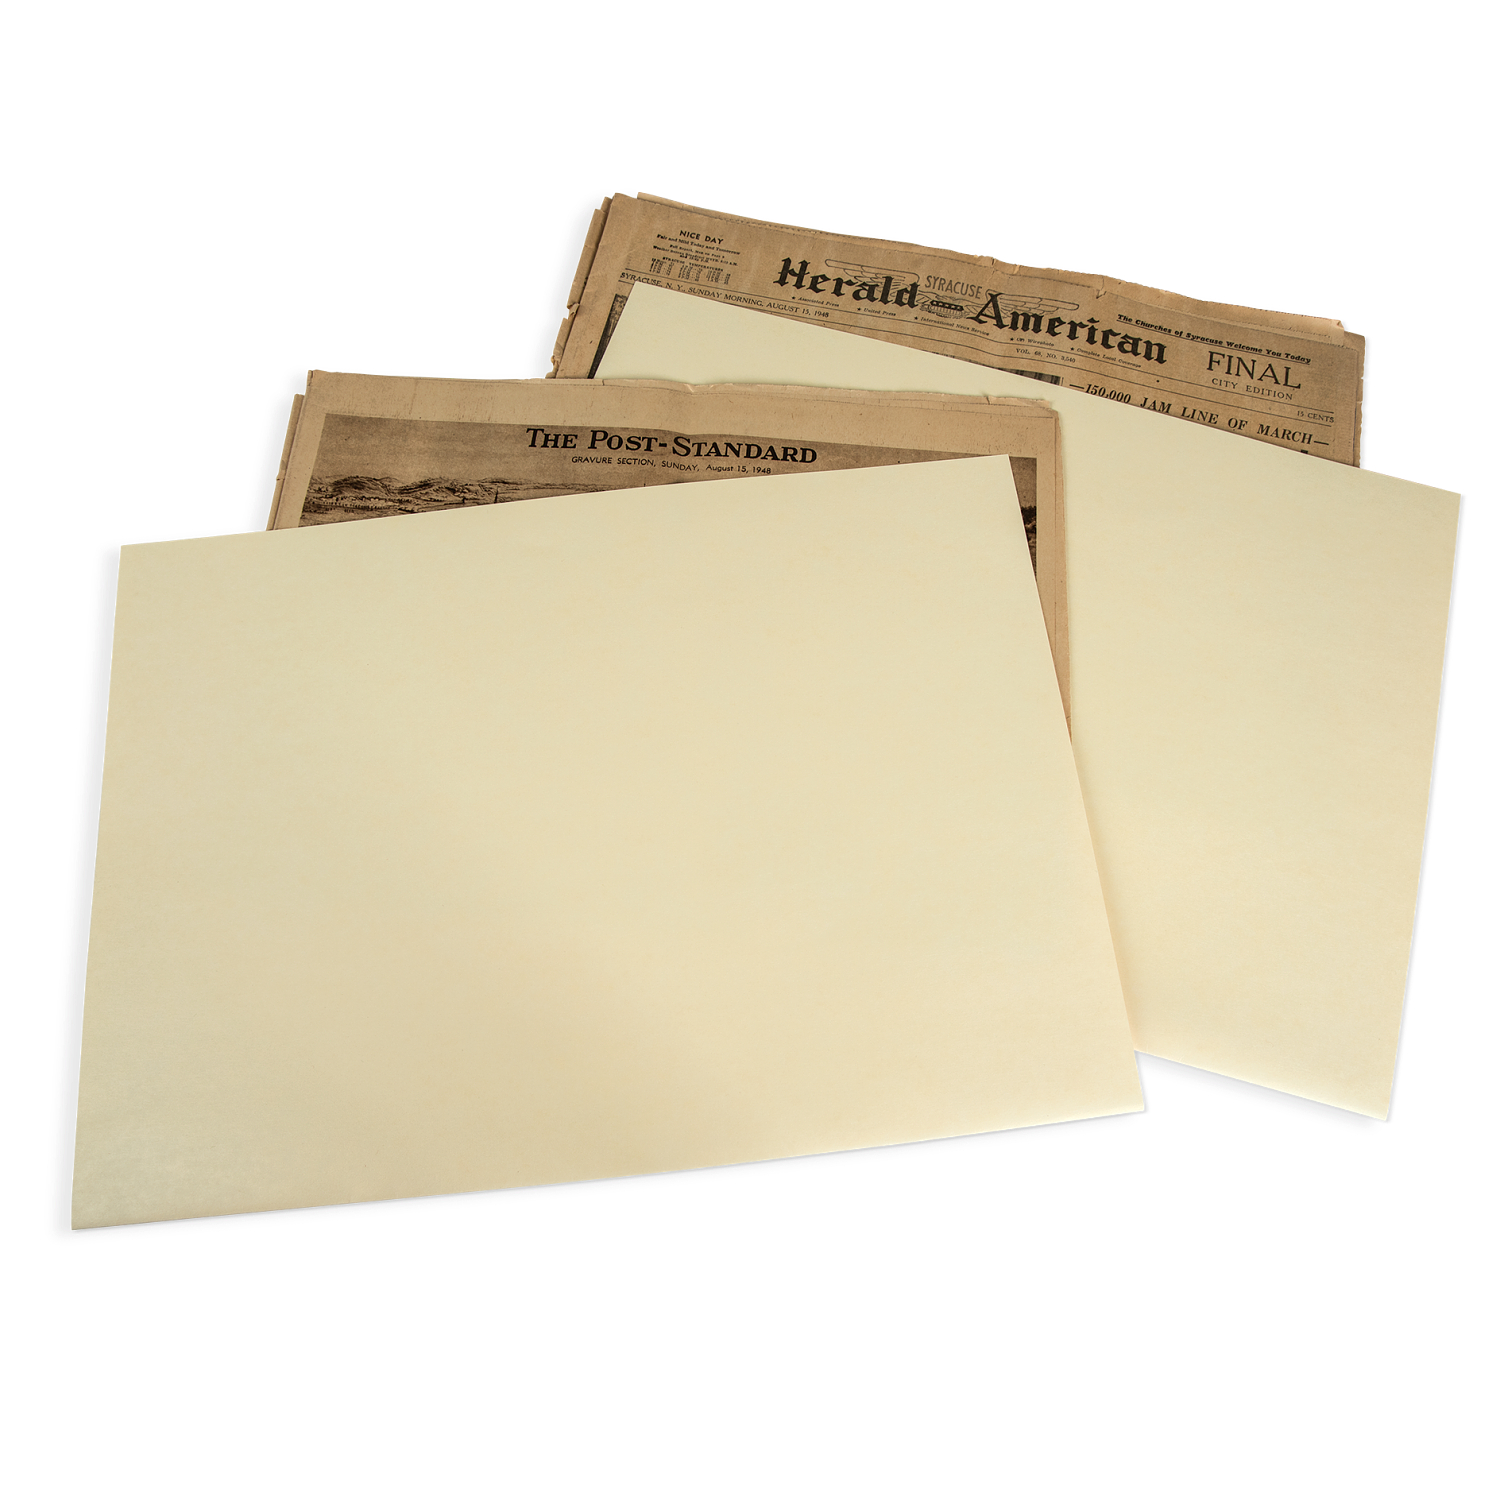 Gaylord Archival® Family Archives Kit, Kits, Document Preservation, Preservation